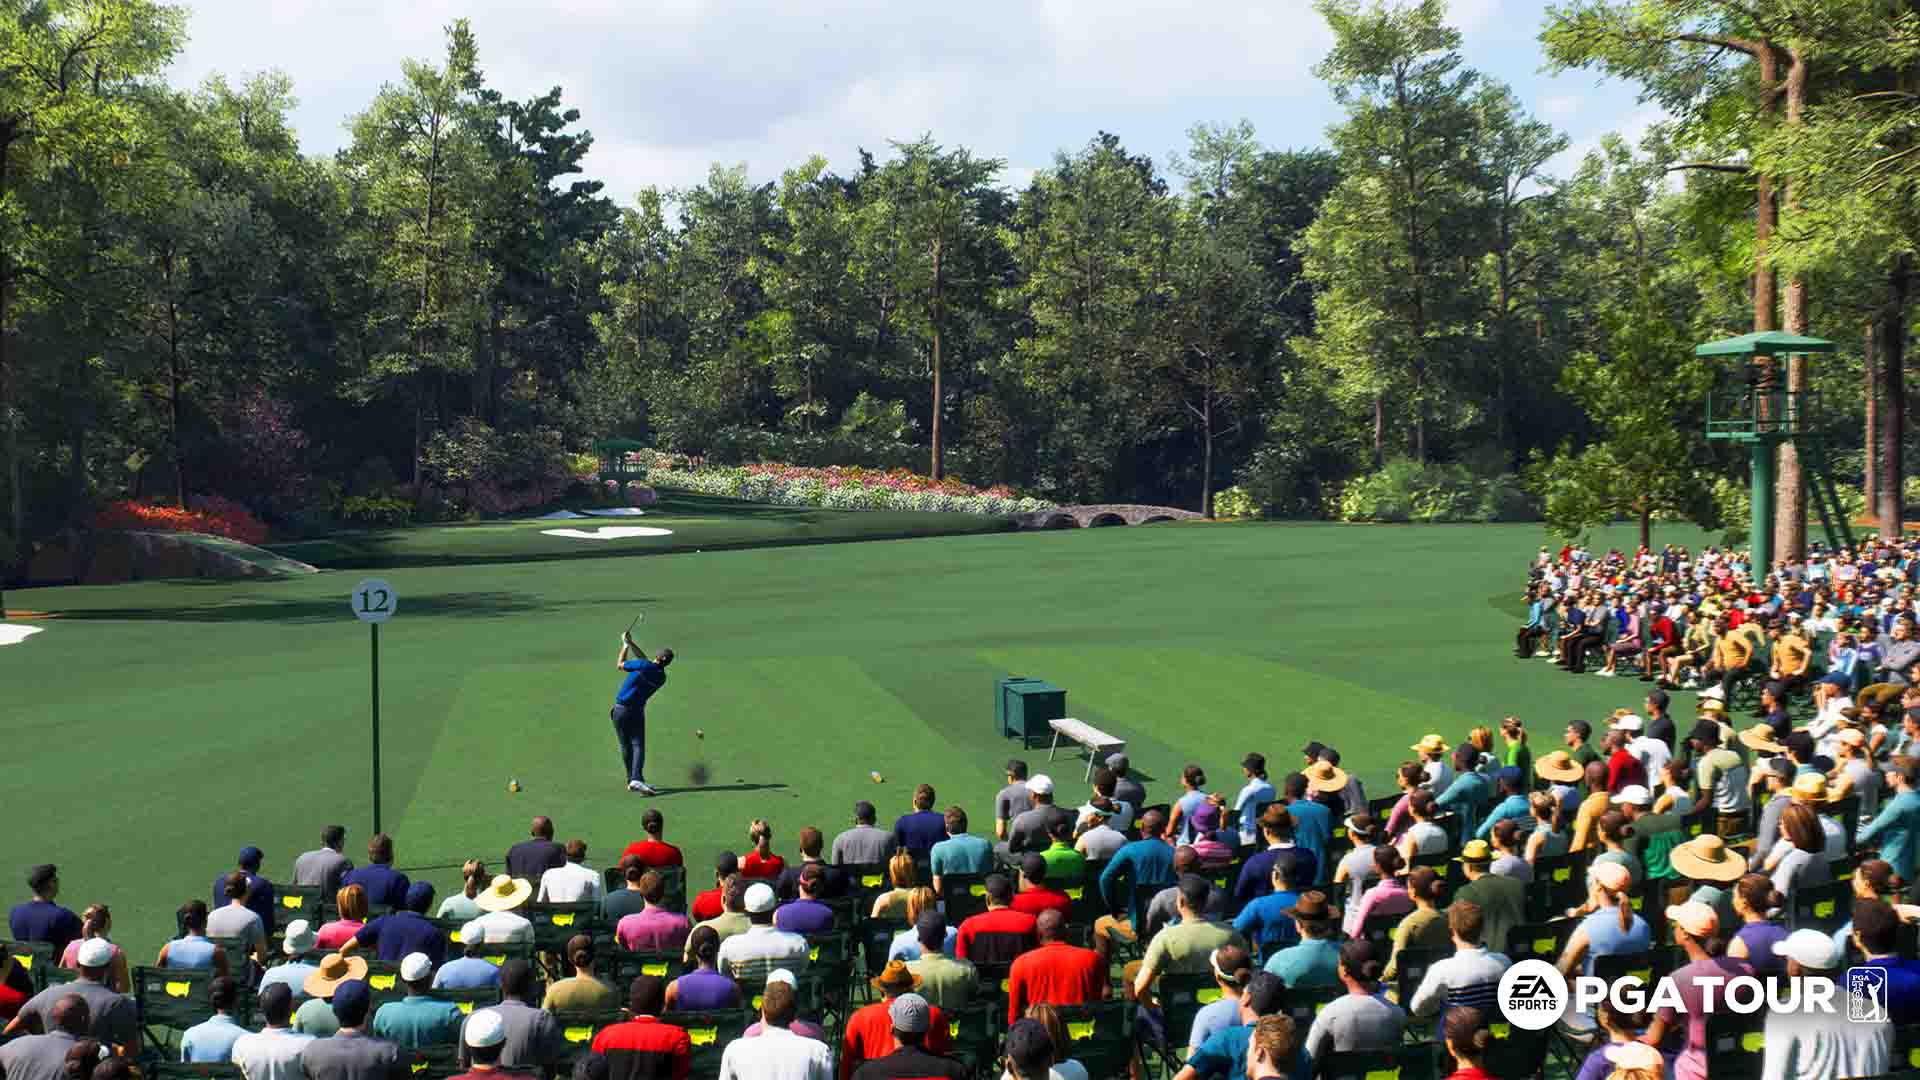 EA Sports PGA Tour is out this March, and it looks stunning